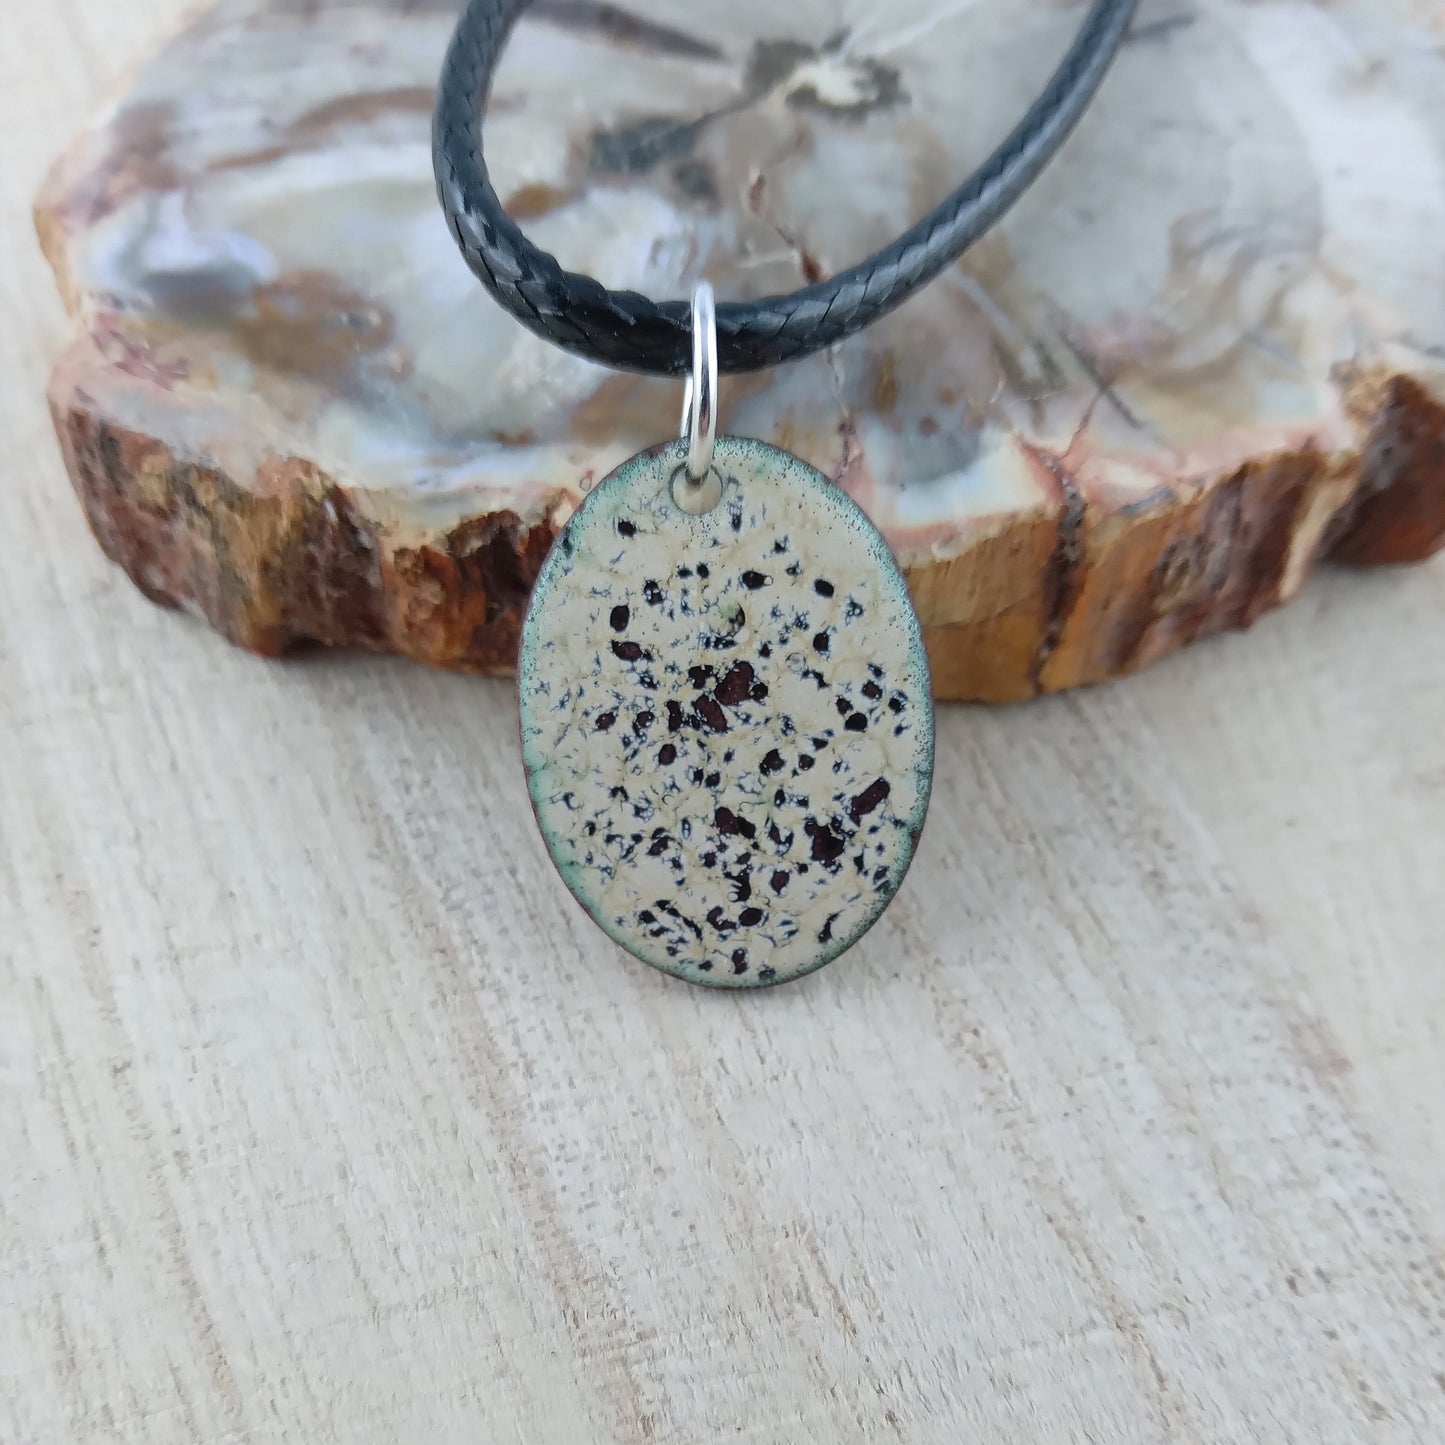 Pendant with enamel, oval pendant with chain